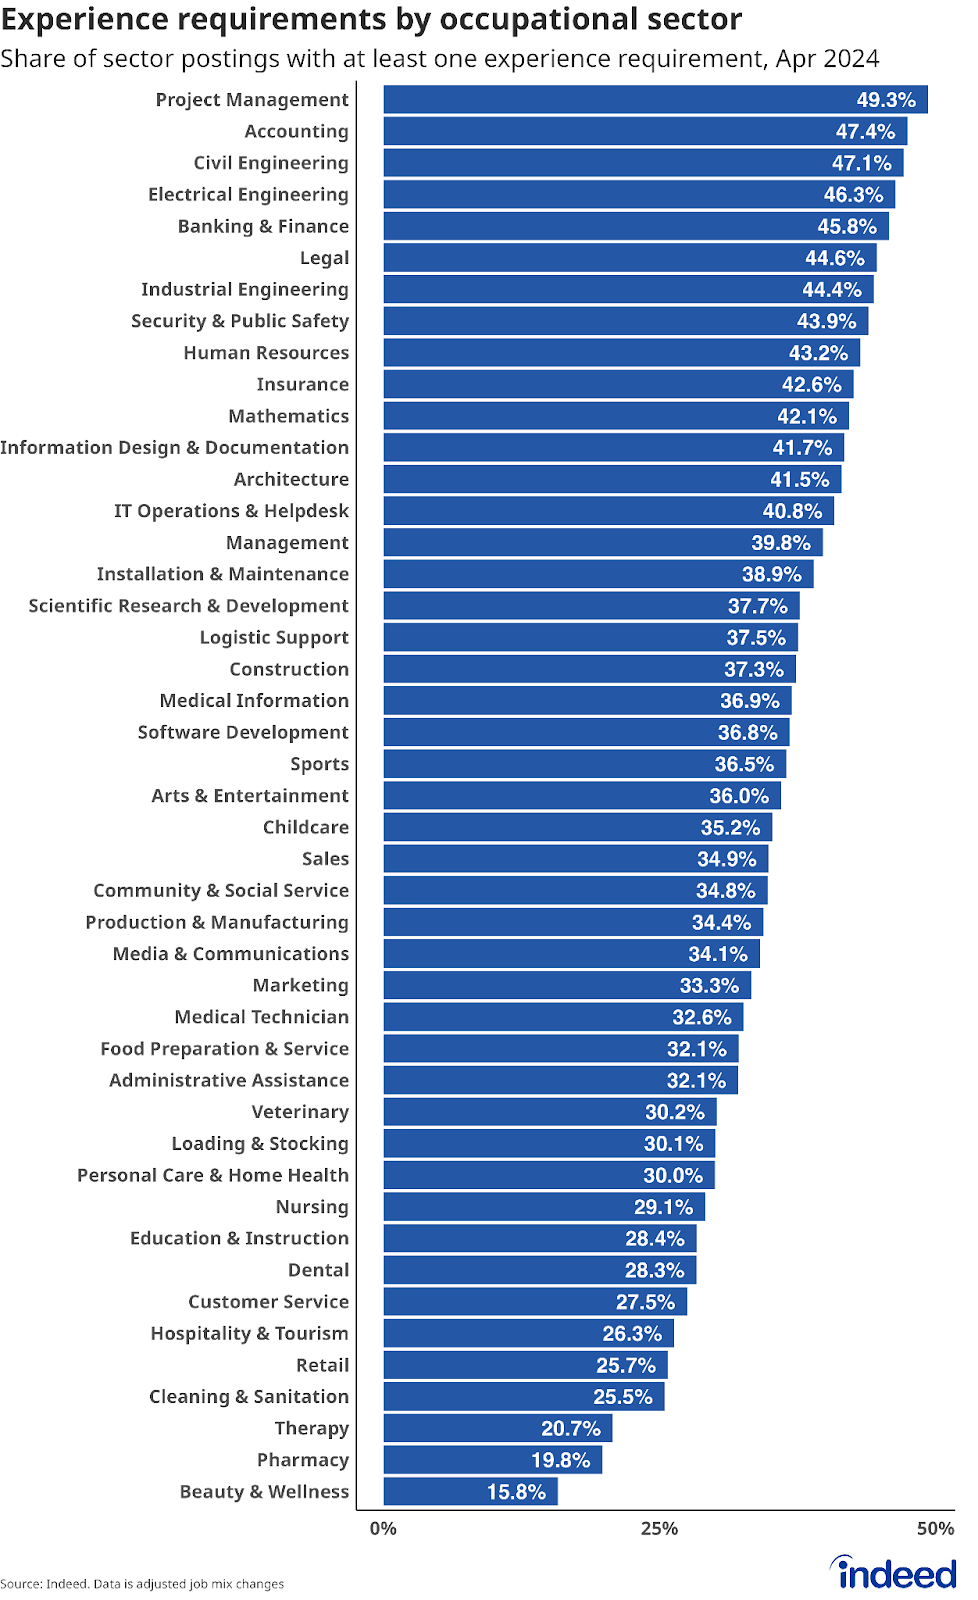 A bar chart titled, “Experience requirements by occupational sector.” Bars show the share of job postings in each sector that contain year-specific experience requirements. Project management and engineering roles tend to have the highest requirements, while positions in beauty & wellness, pharmacy, and therapy typically omit experience requirements.